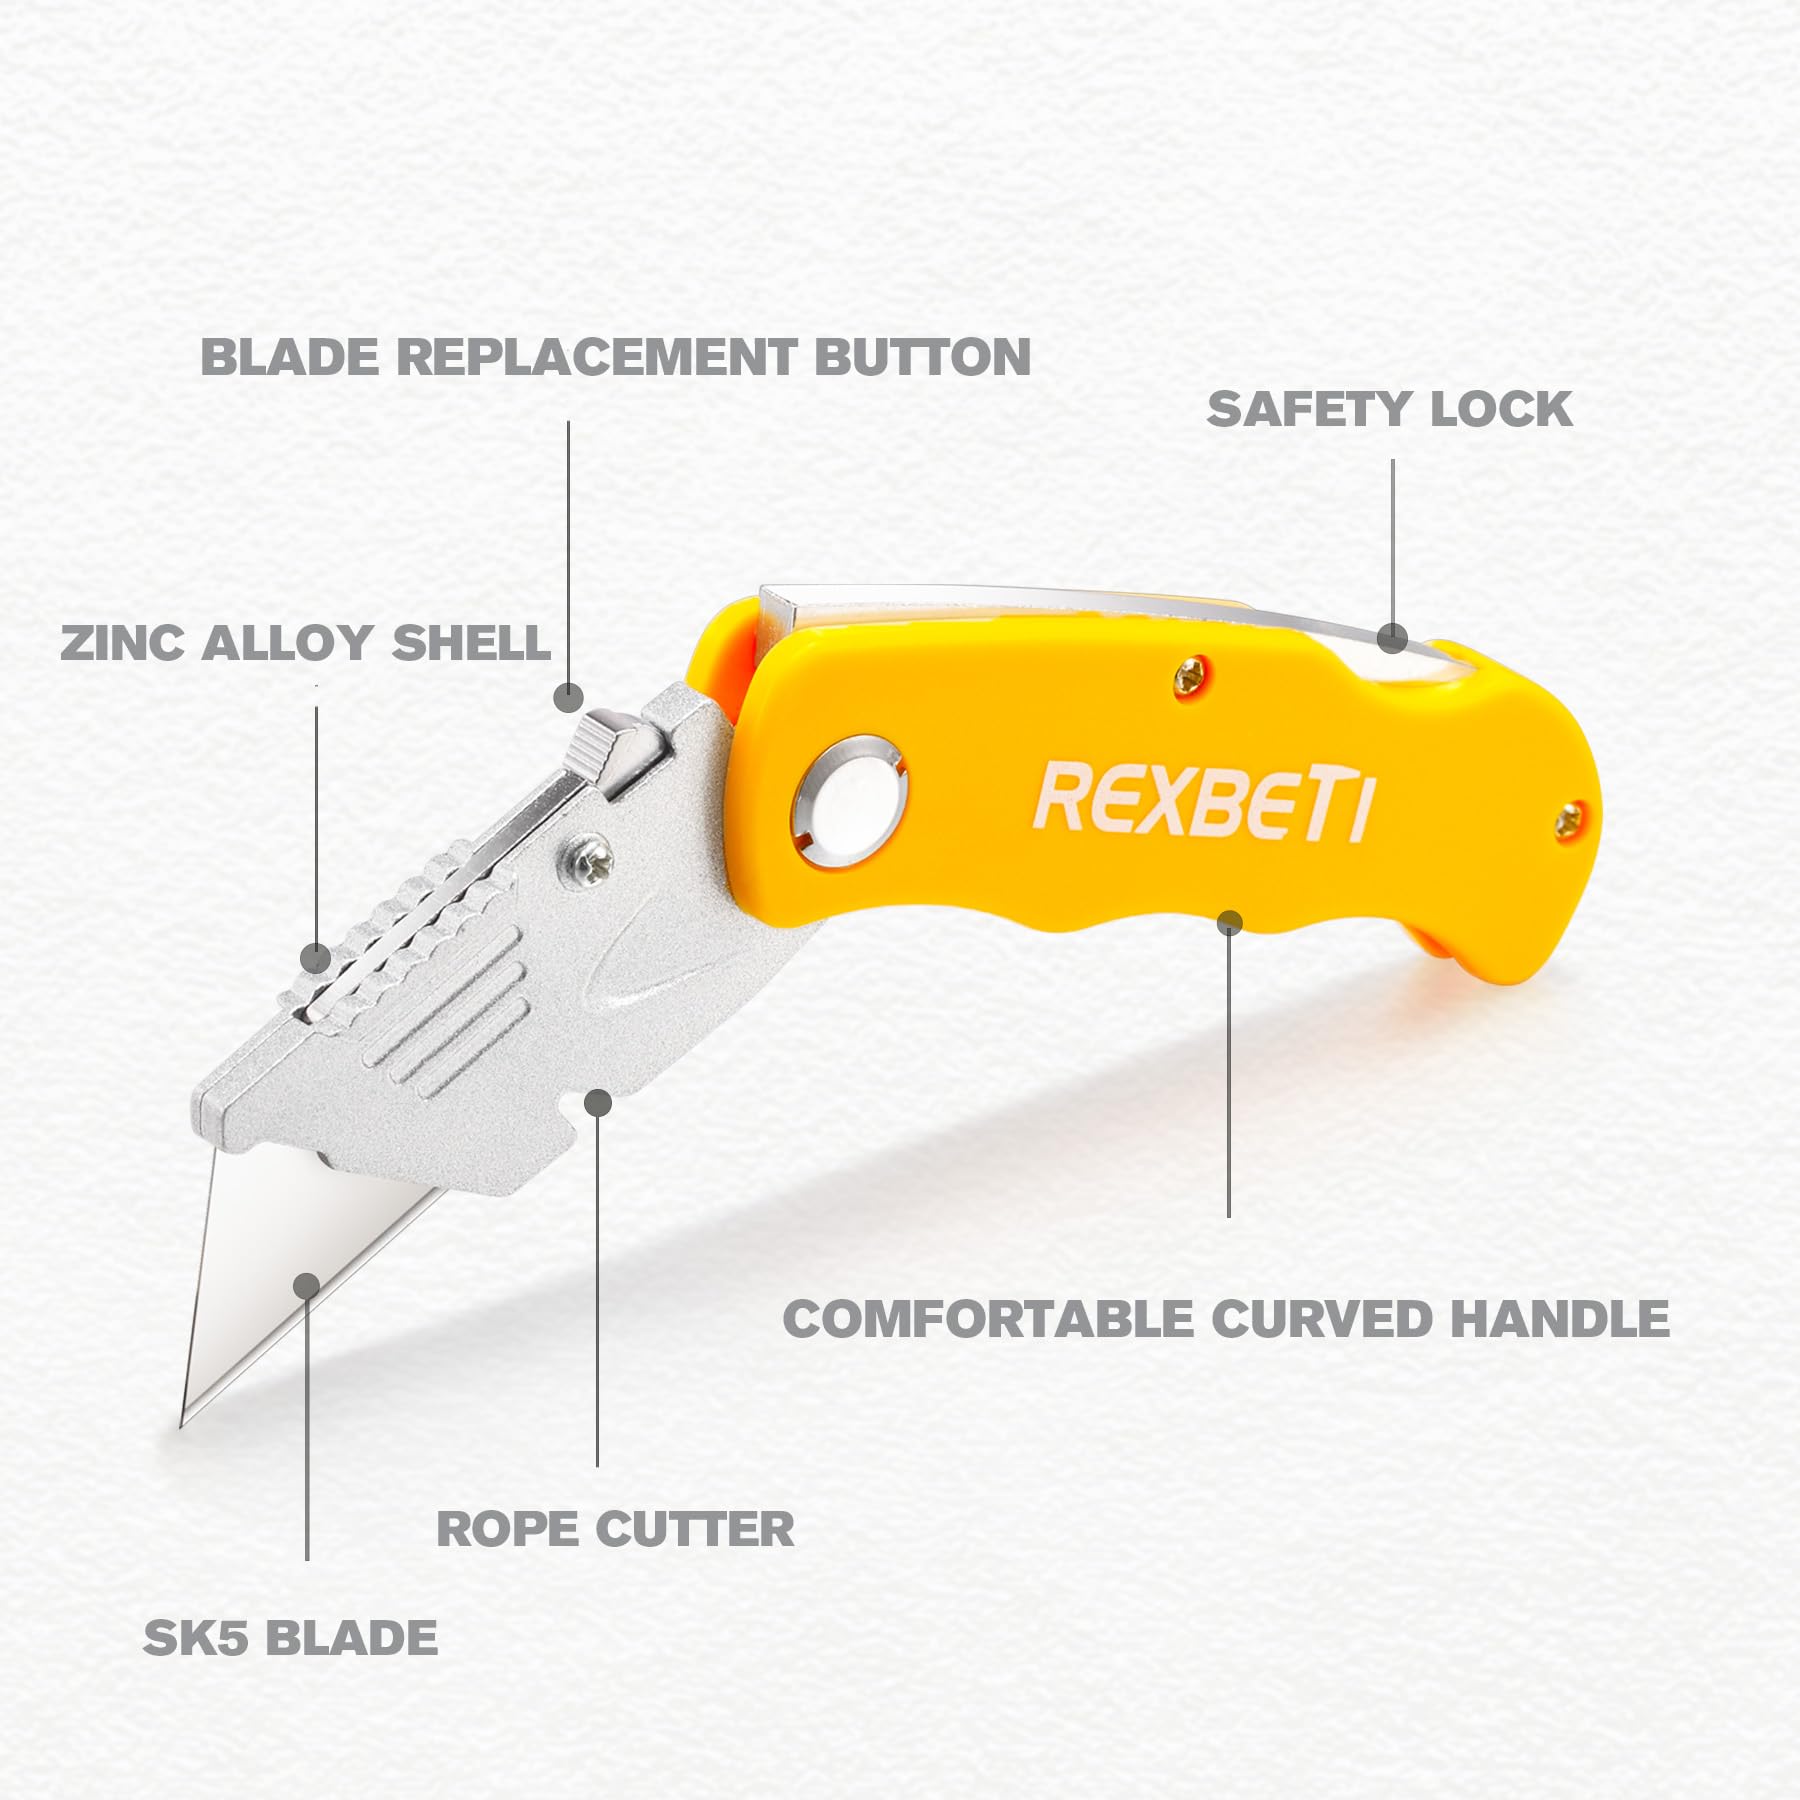 REXBETI 12 Pack Folding Utility Knife Set Quick Change Blade box cutter, Back-lock Mechanism with 20 Extra Blades, SK5 Standard Replaceable Razor Blad